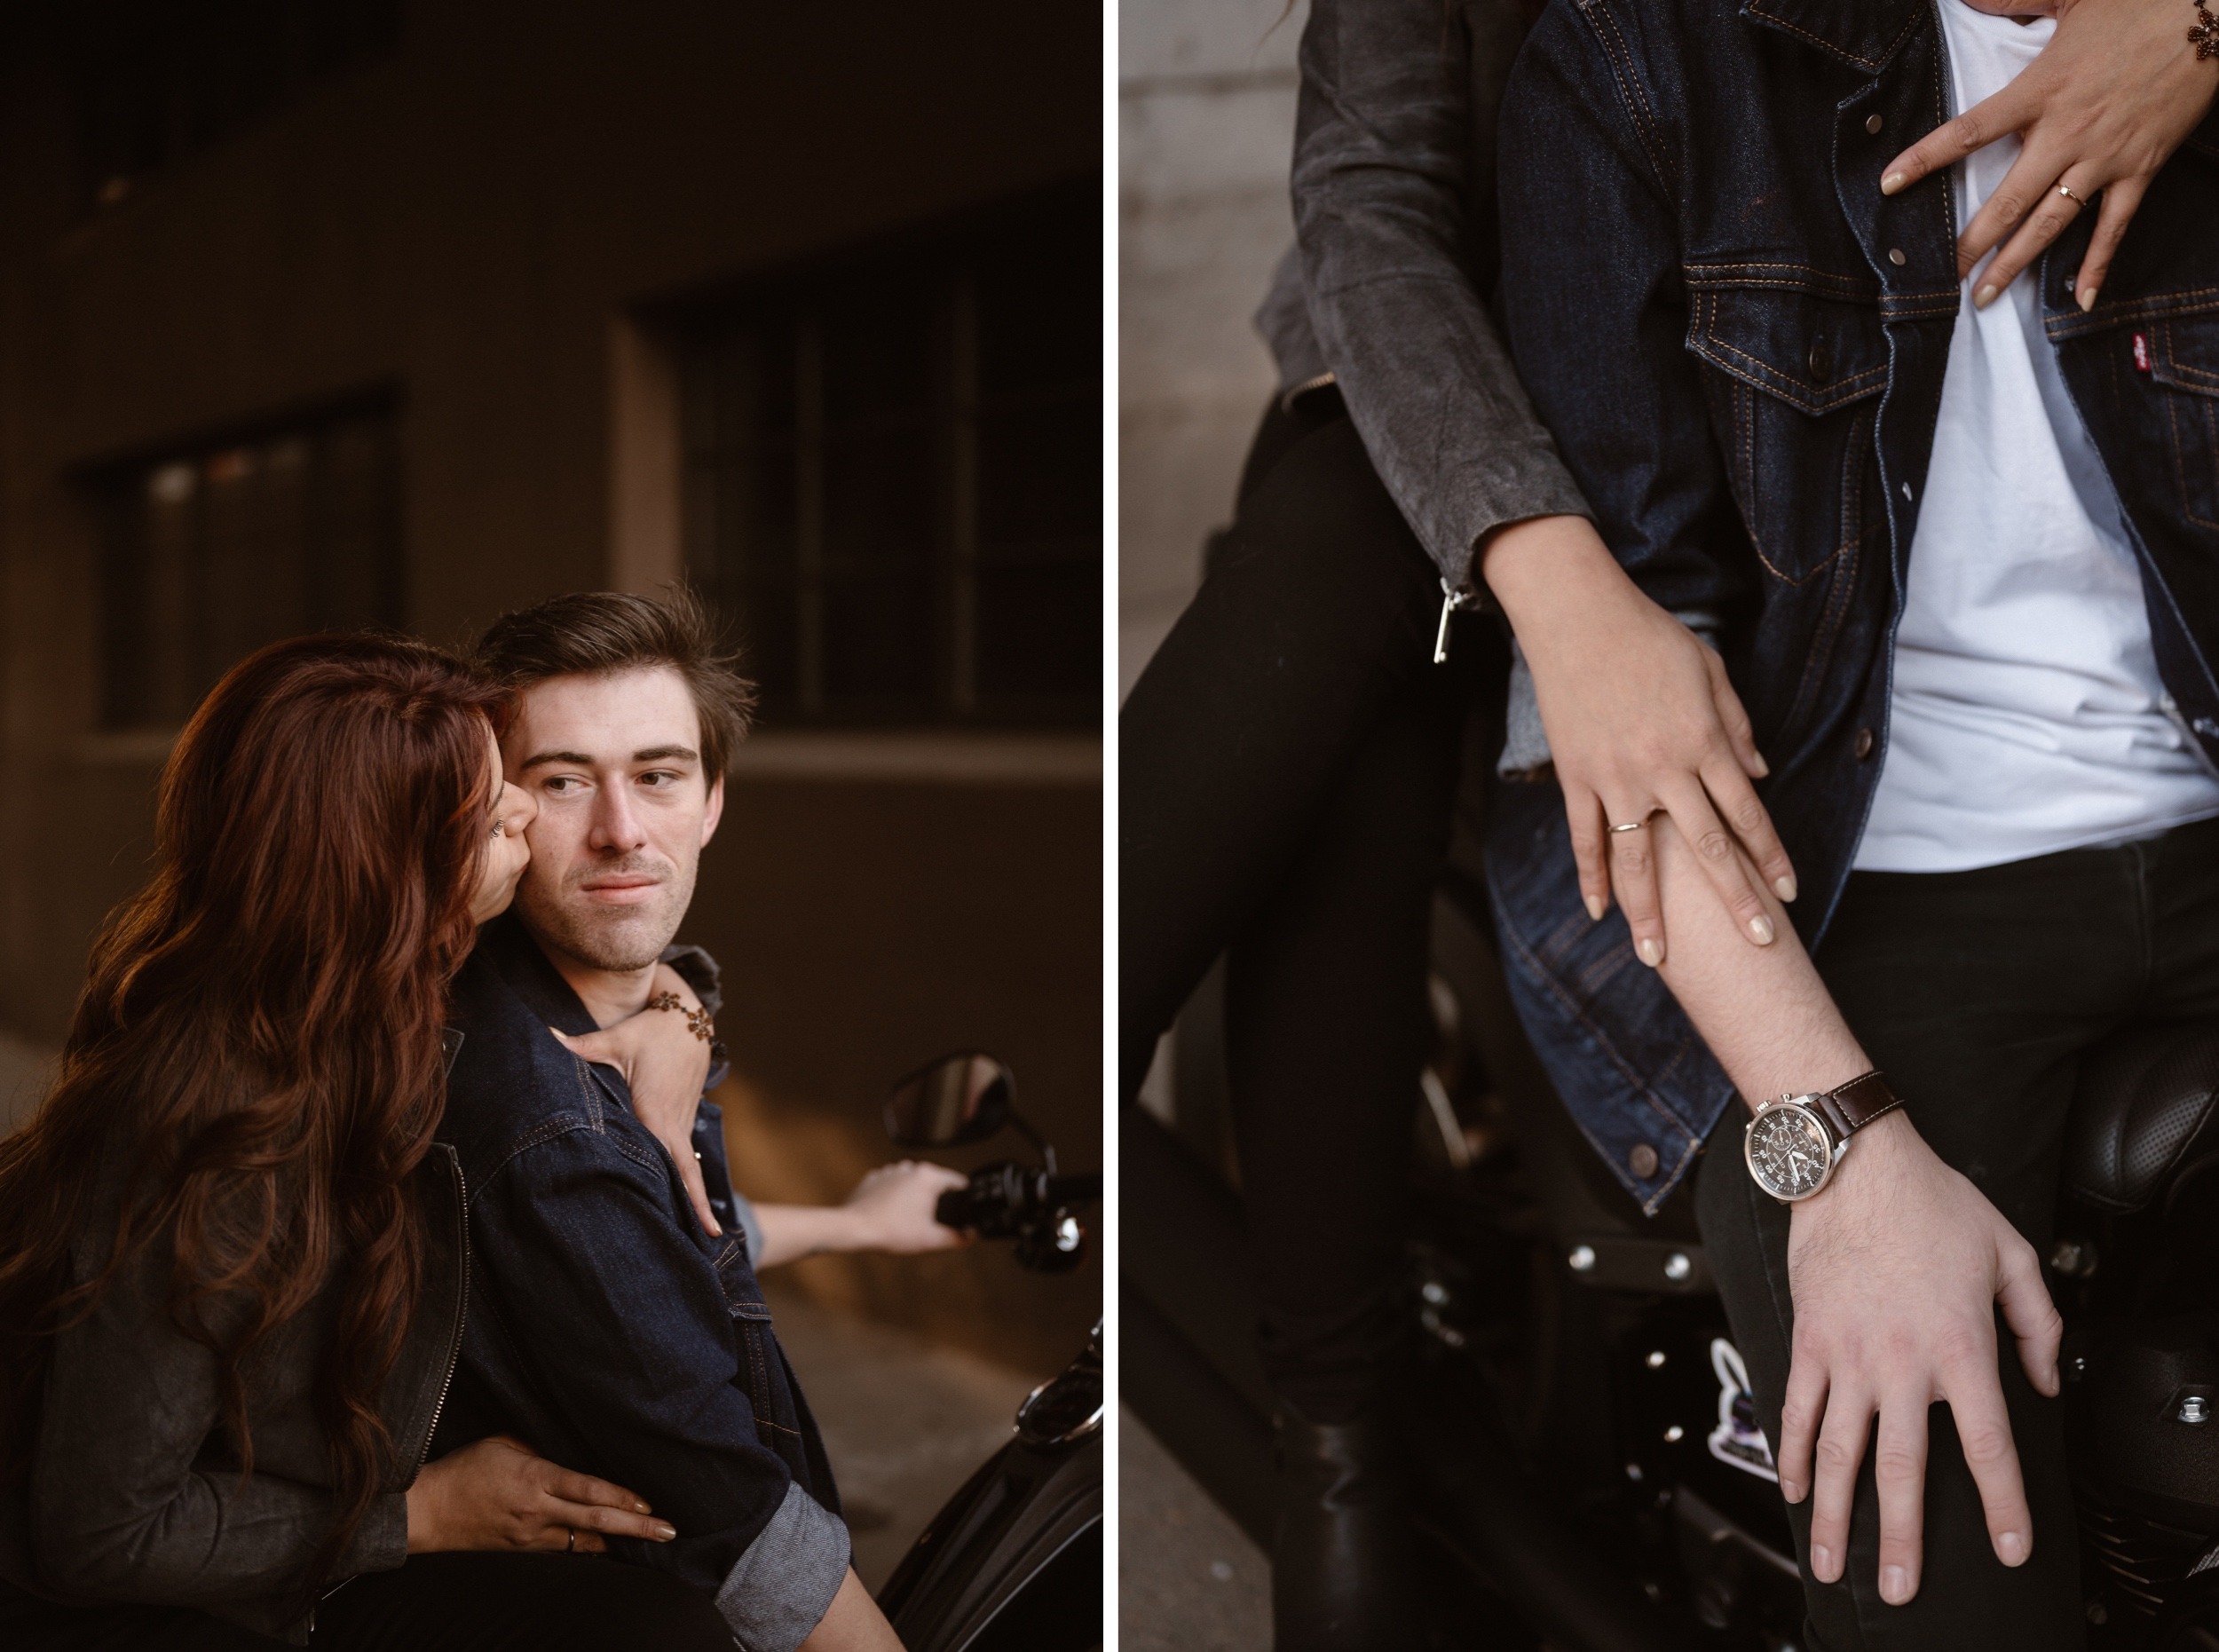 A Colorado engaged couple poses for their Downtown Denver Engagement session near Union Station. Photo by Denver elopement photographer, Ashley Joyce Photography, copyright 2022.